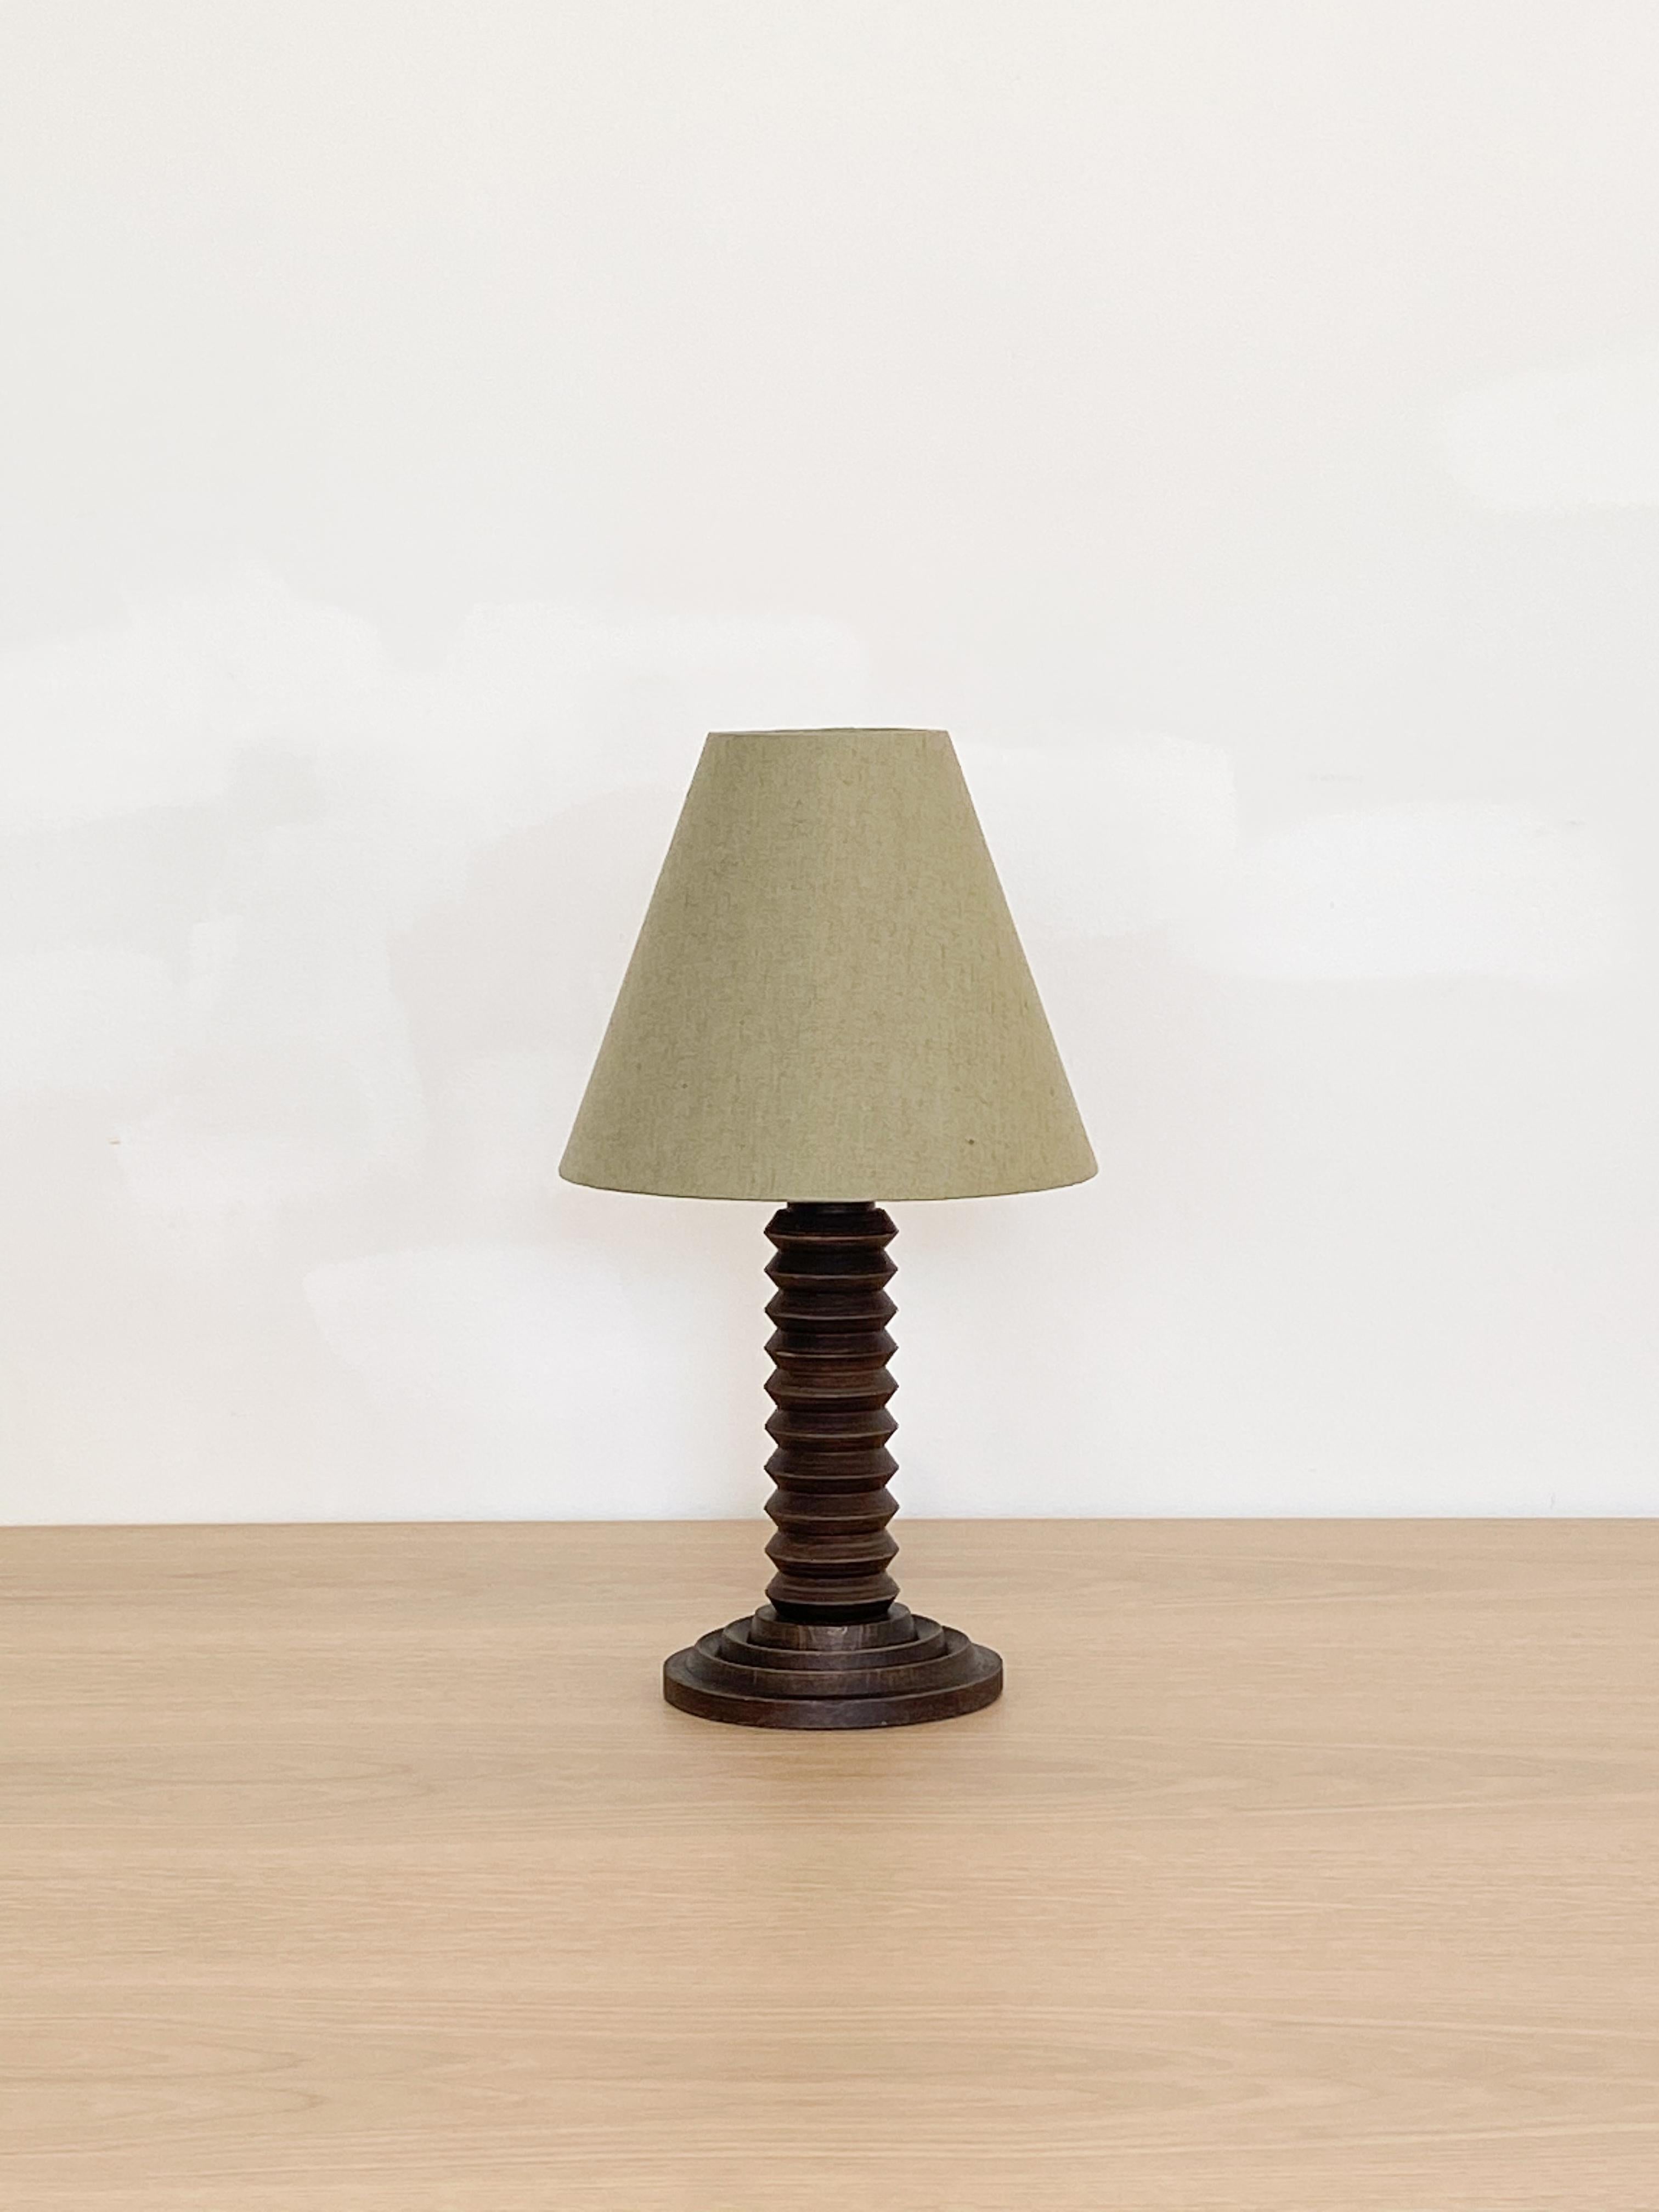 Hand carved wood table lamp from France, 1940s. Carved design with original wood finish. New green linen shade and newly re-wired. 

Measures: Shade diameter 12.25